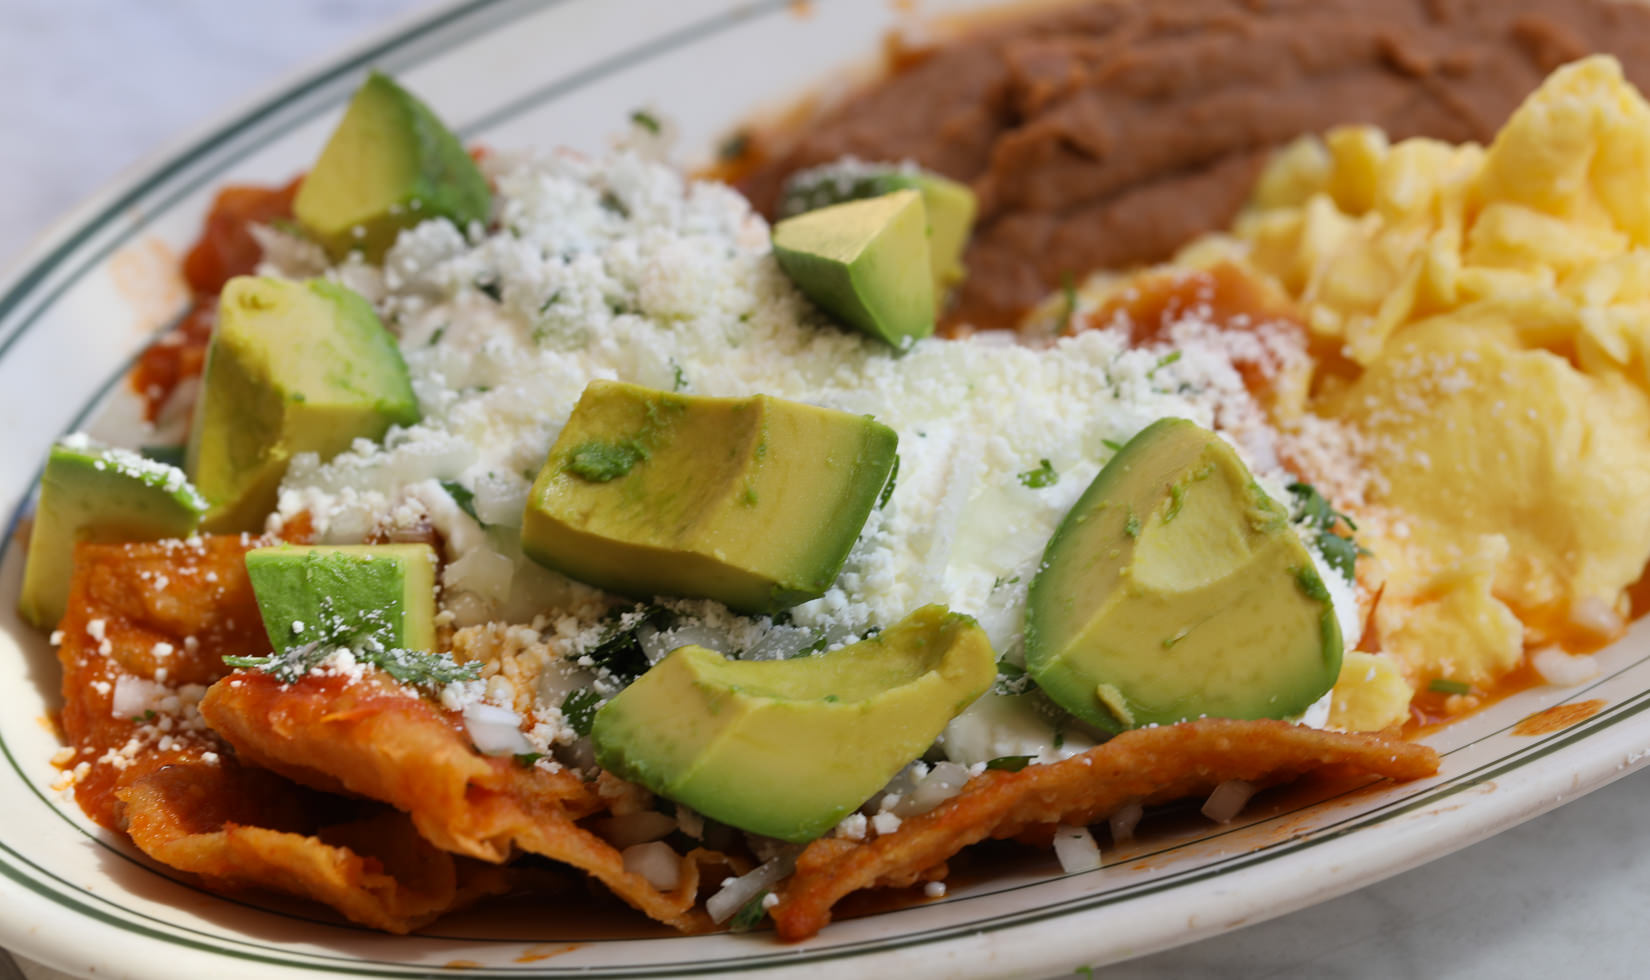 Chilaquiles at El Molino Central Mexican Restaurant in Sonoma